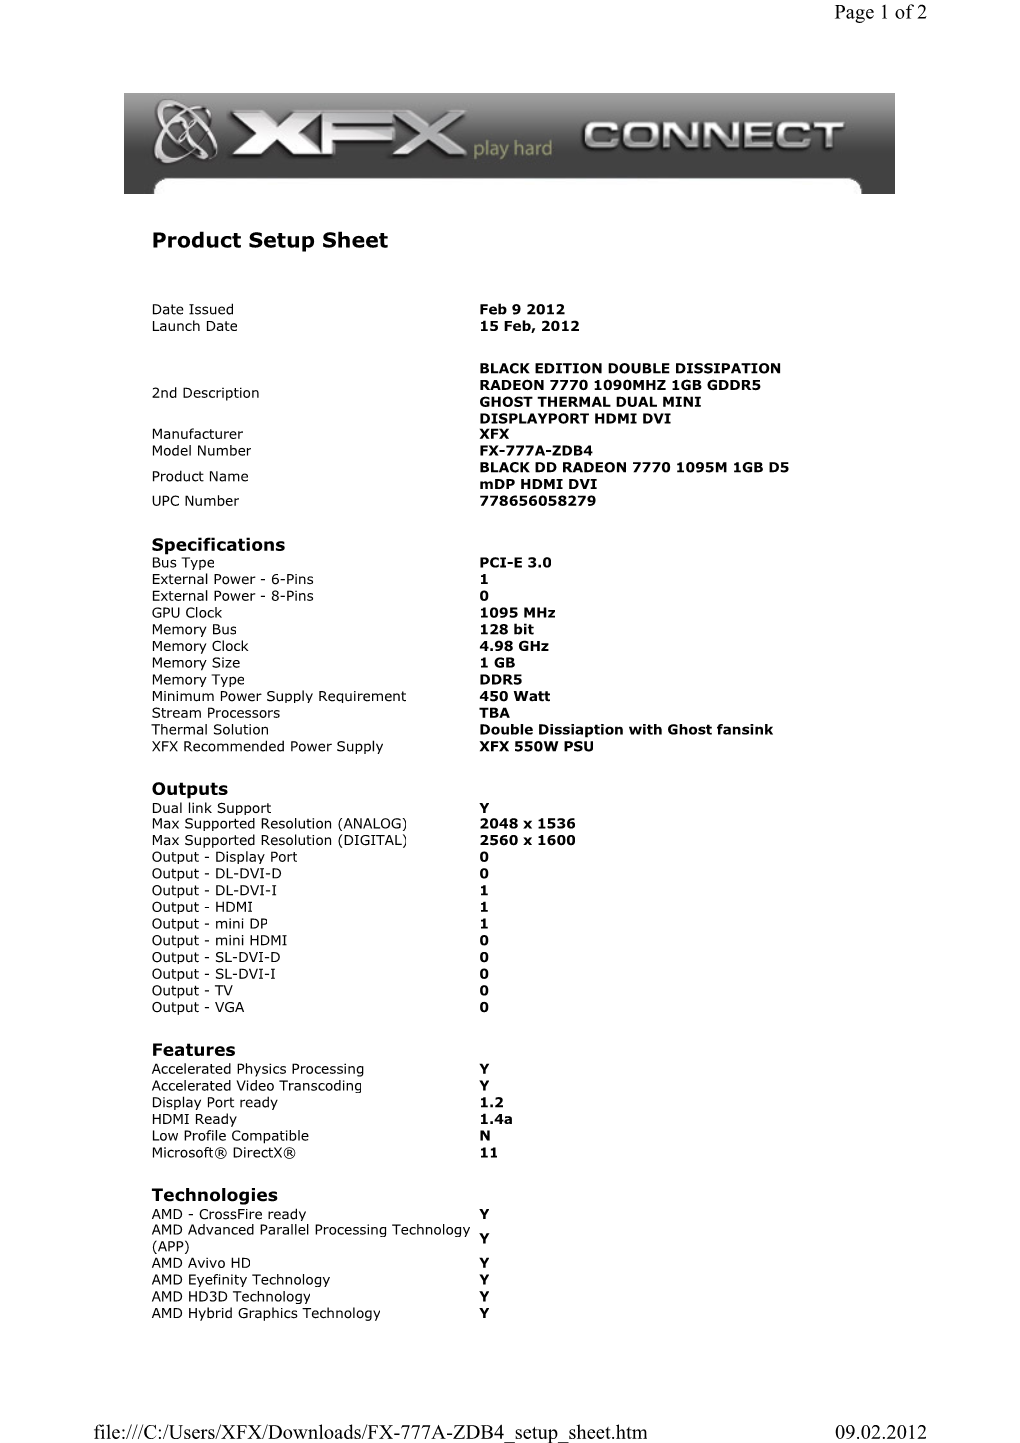 Product Setup Sheet Page 1 of 2 09.02.2012 File:///C:/Users